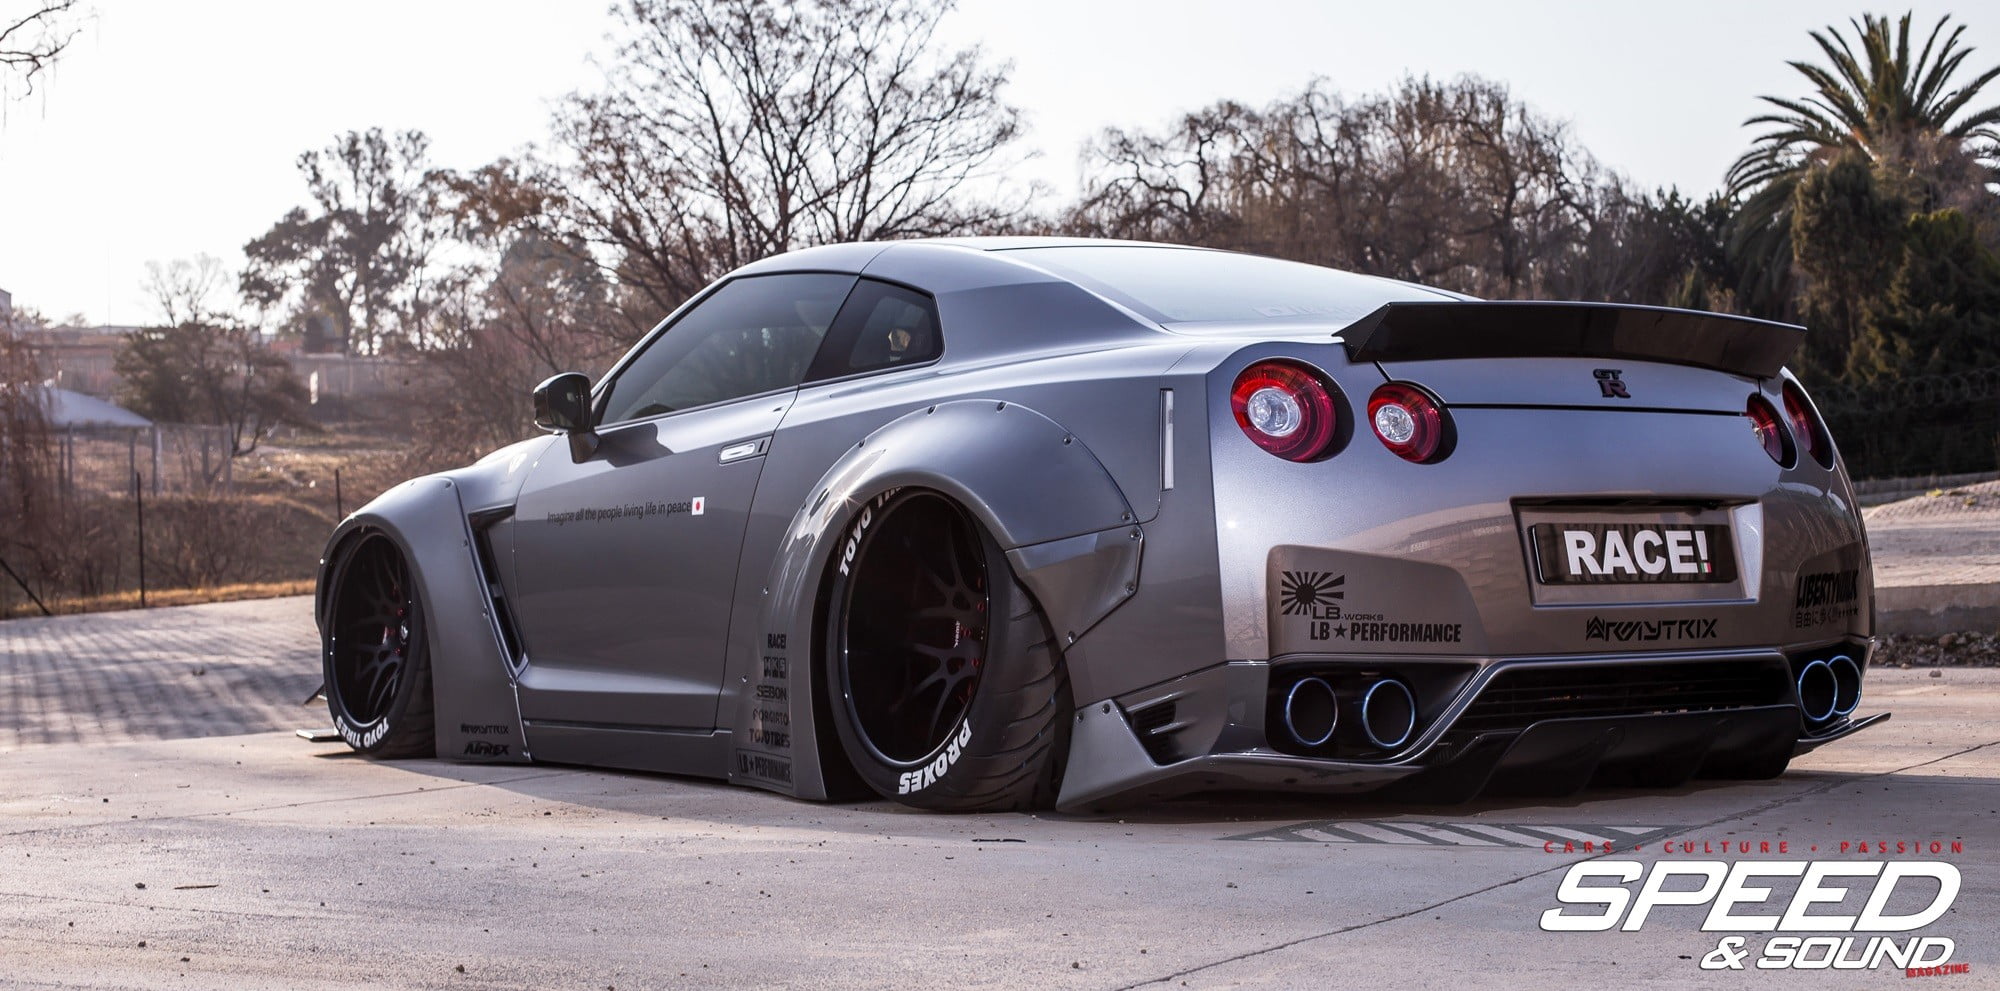 silver coupe, Nissan GT-R, Nissan GTR, LB Performance, mode of transportation